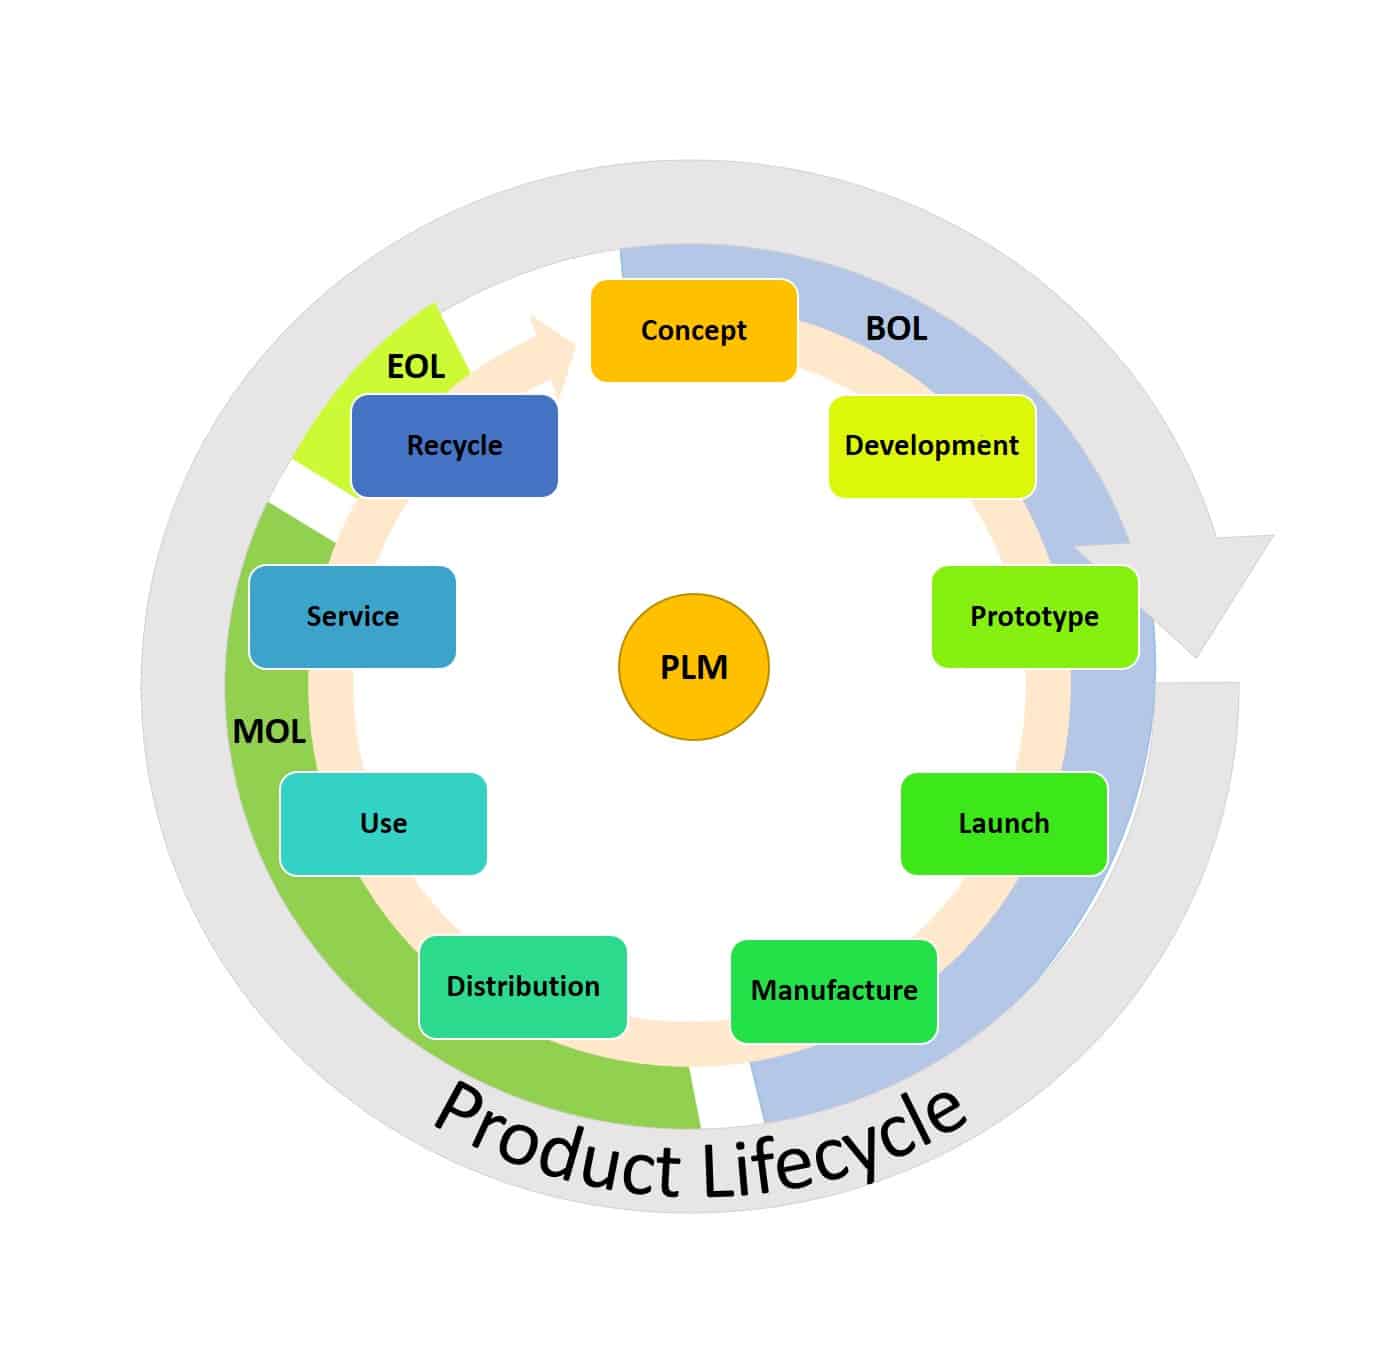 business plan want to know the life cycle of a product